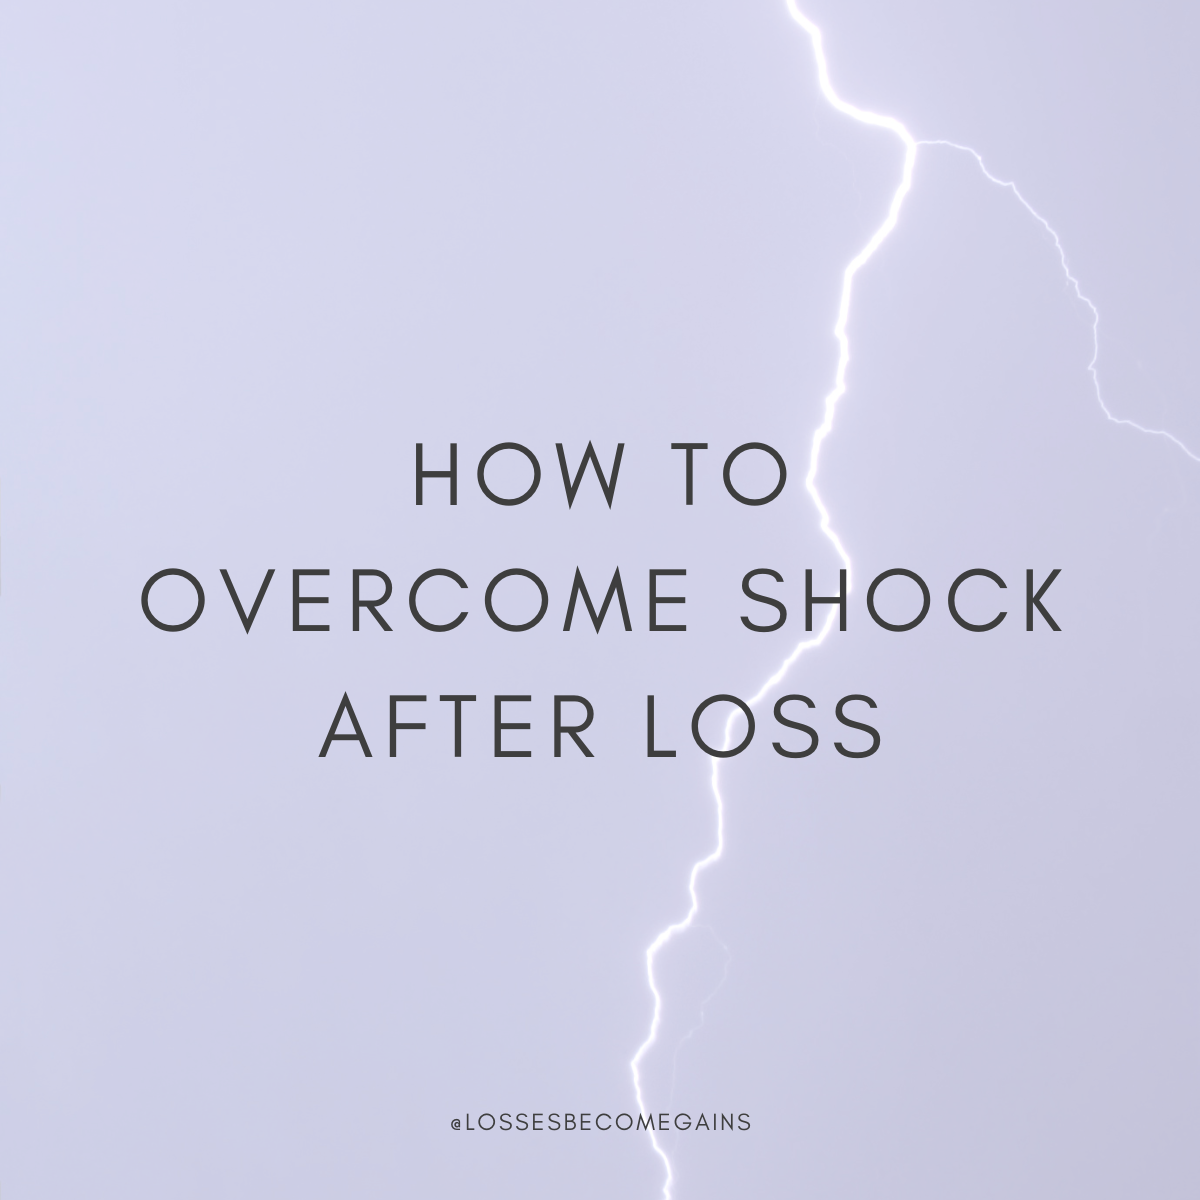 How to overcome shock after loss by Losses Become Gains